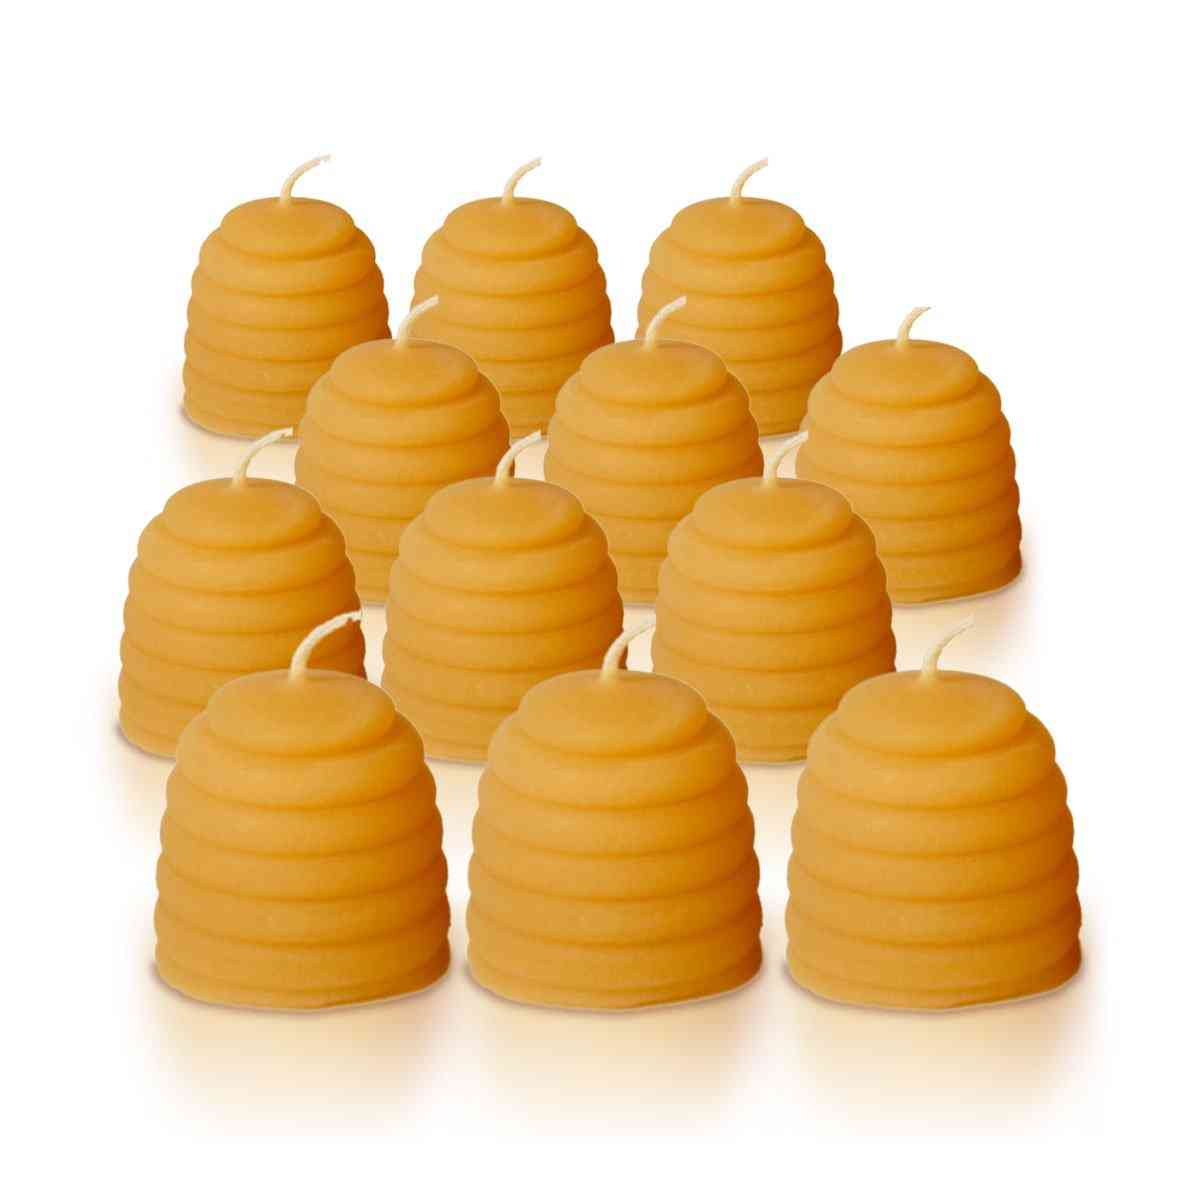 African Beeswax From Tanzania Beehive Candles